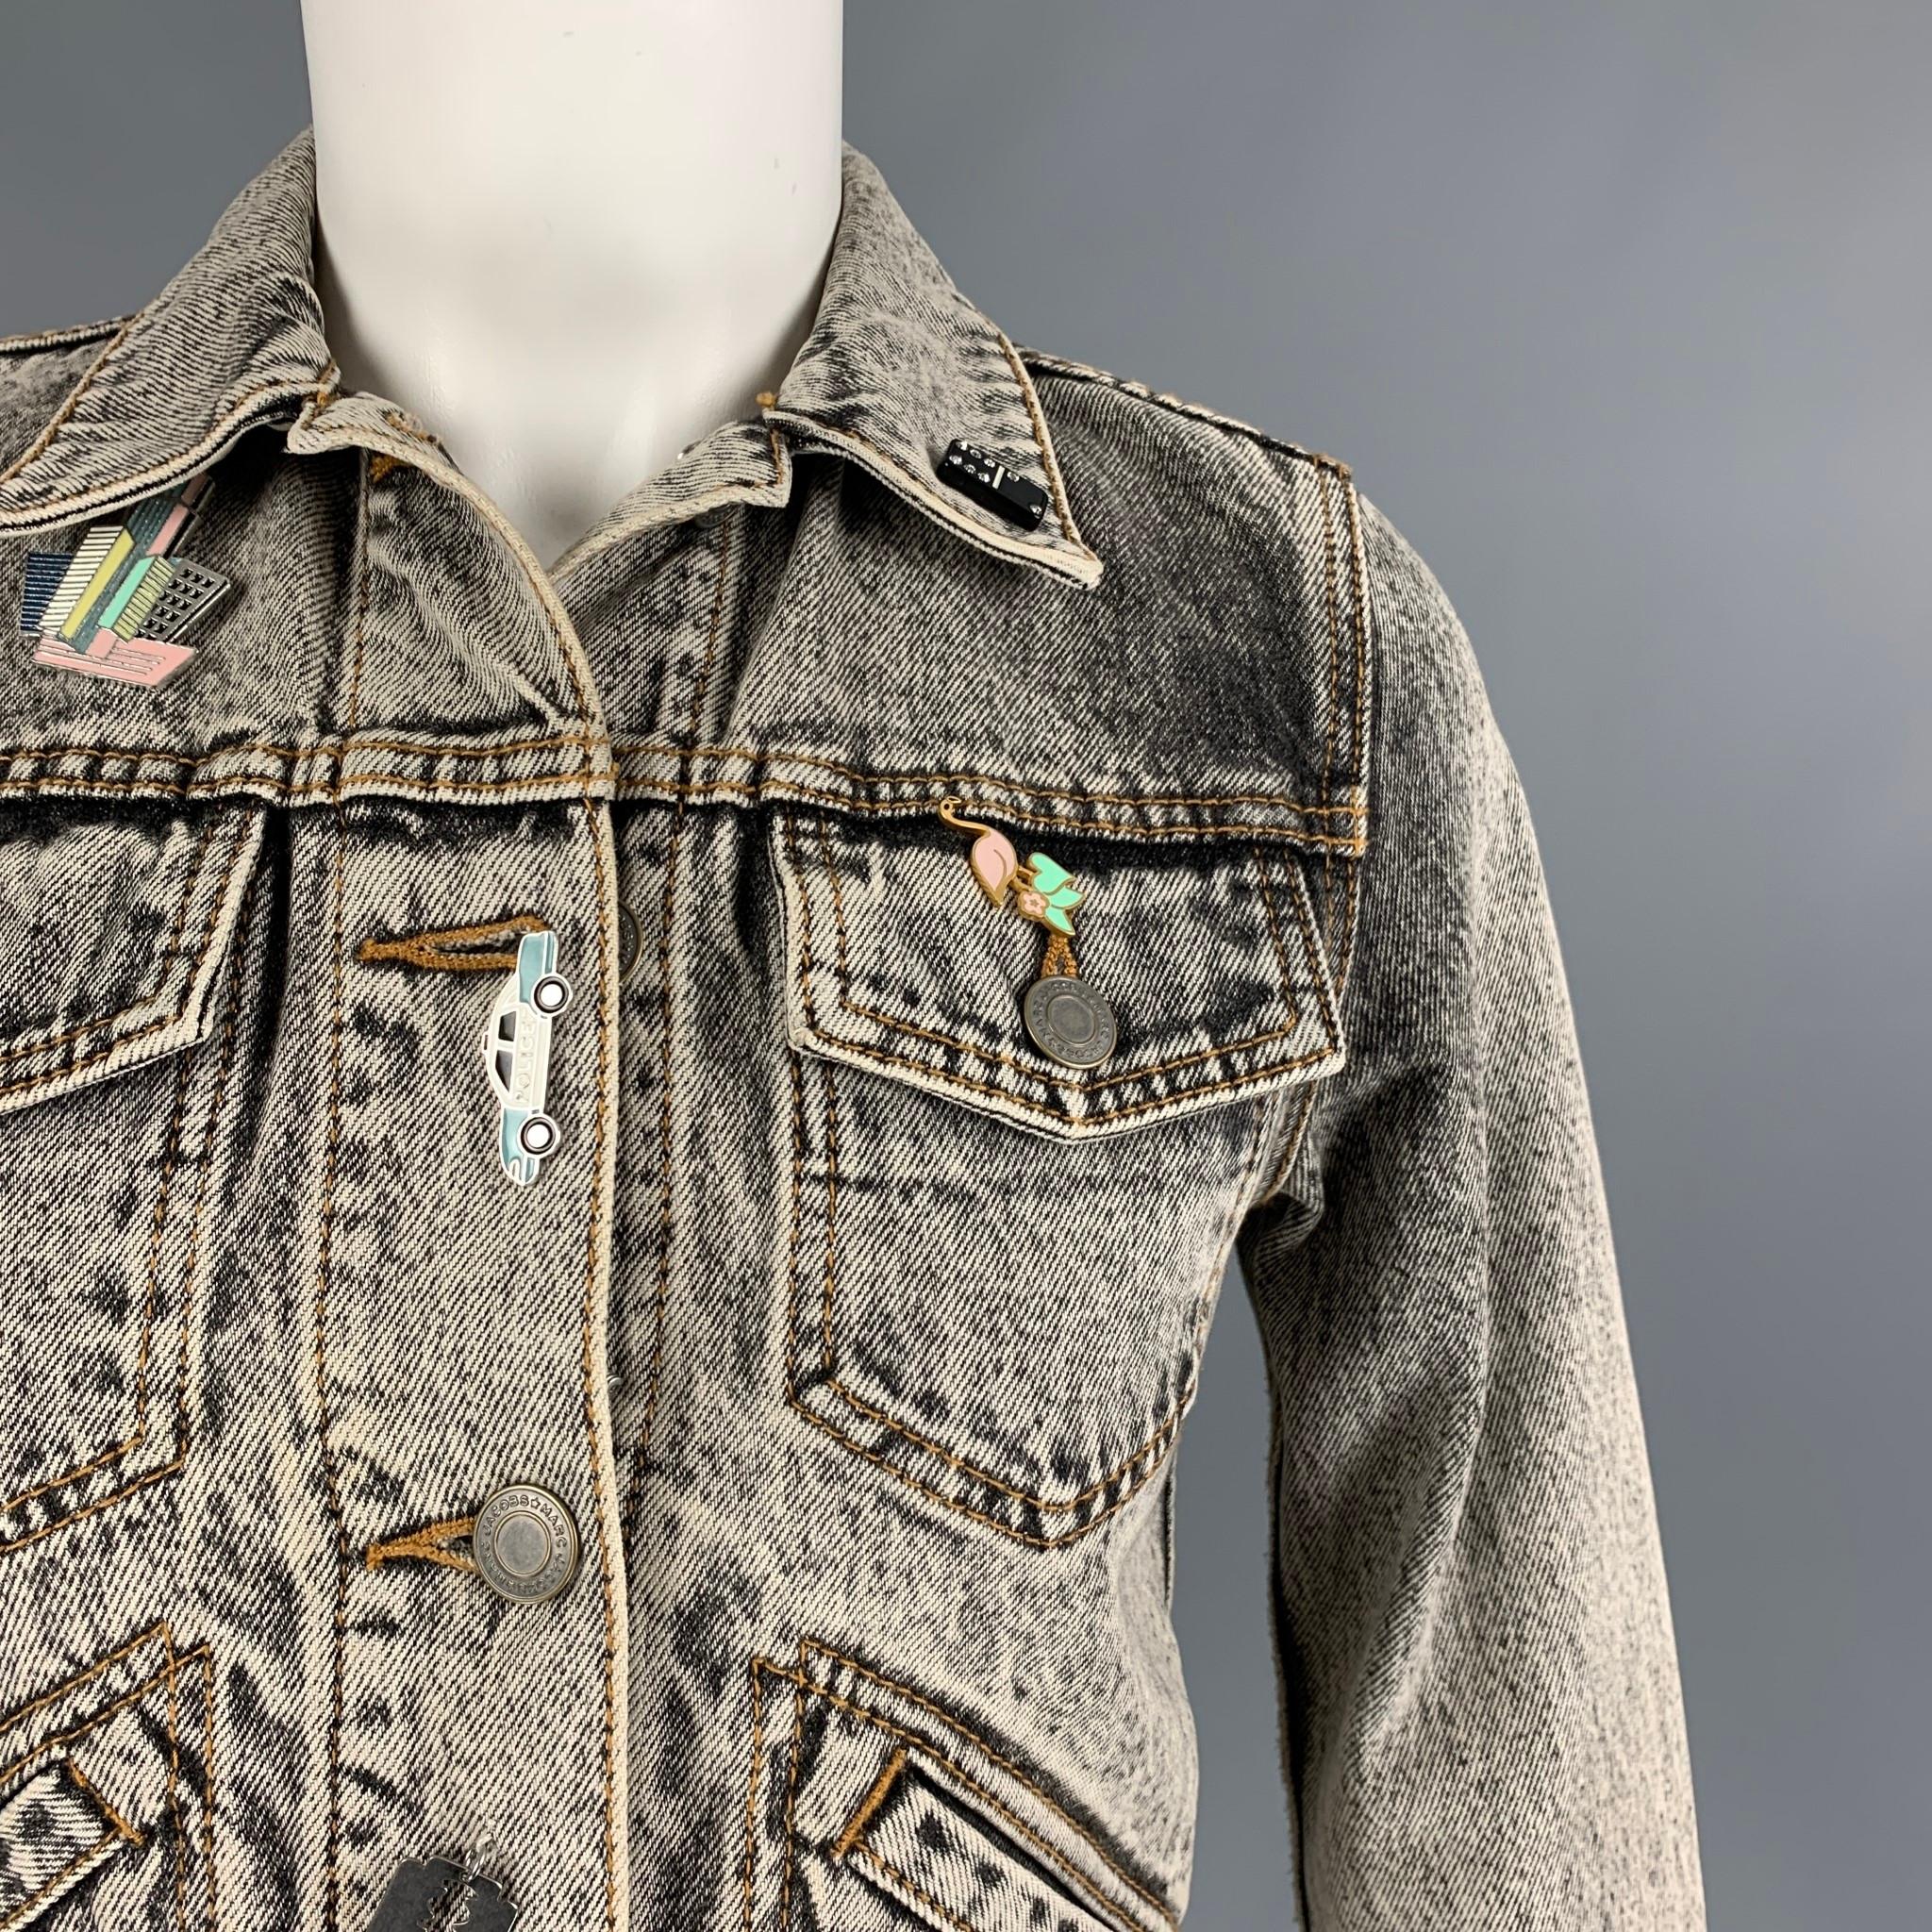 MARC JACOBS jacket comes in a black acid-wash denim featuring a cropped style, pin details, patches throughout, contrast stitching, front pockets, a back embroidered 'paradise' design, and a buttoned closure. 

Very Good Pre-Owned Condition.
Marked: